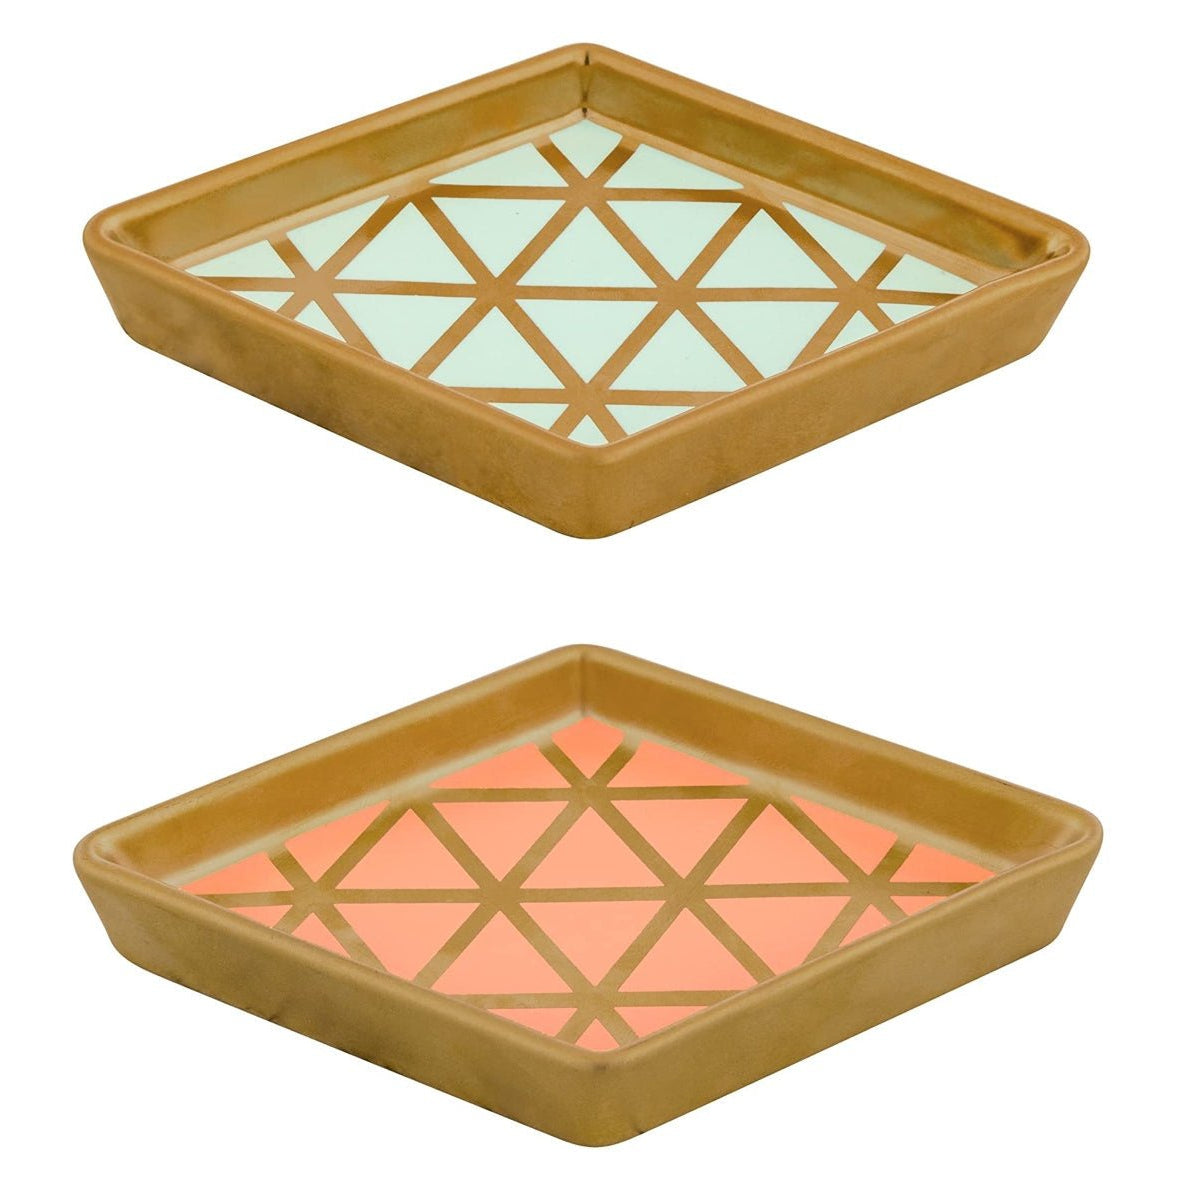 Diamond Trinket Tray in Coral or Turquoise | Ceramic Ring Dish for Dresser or Nightstand